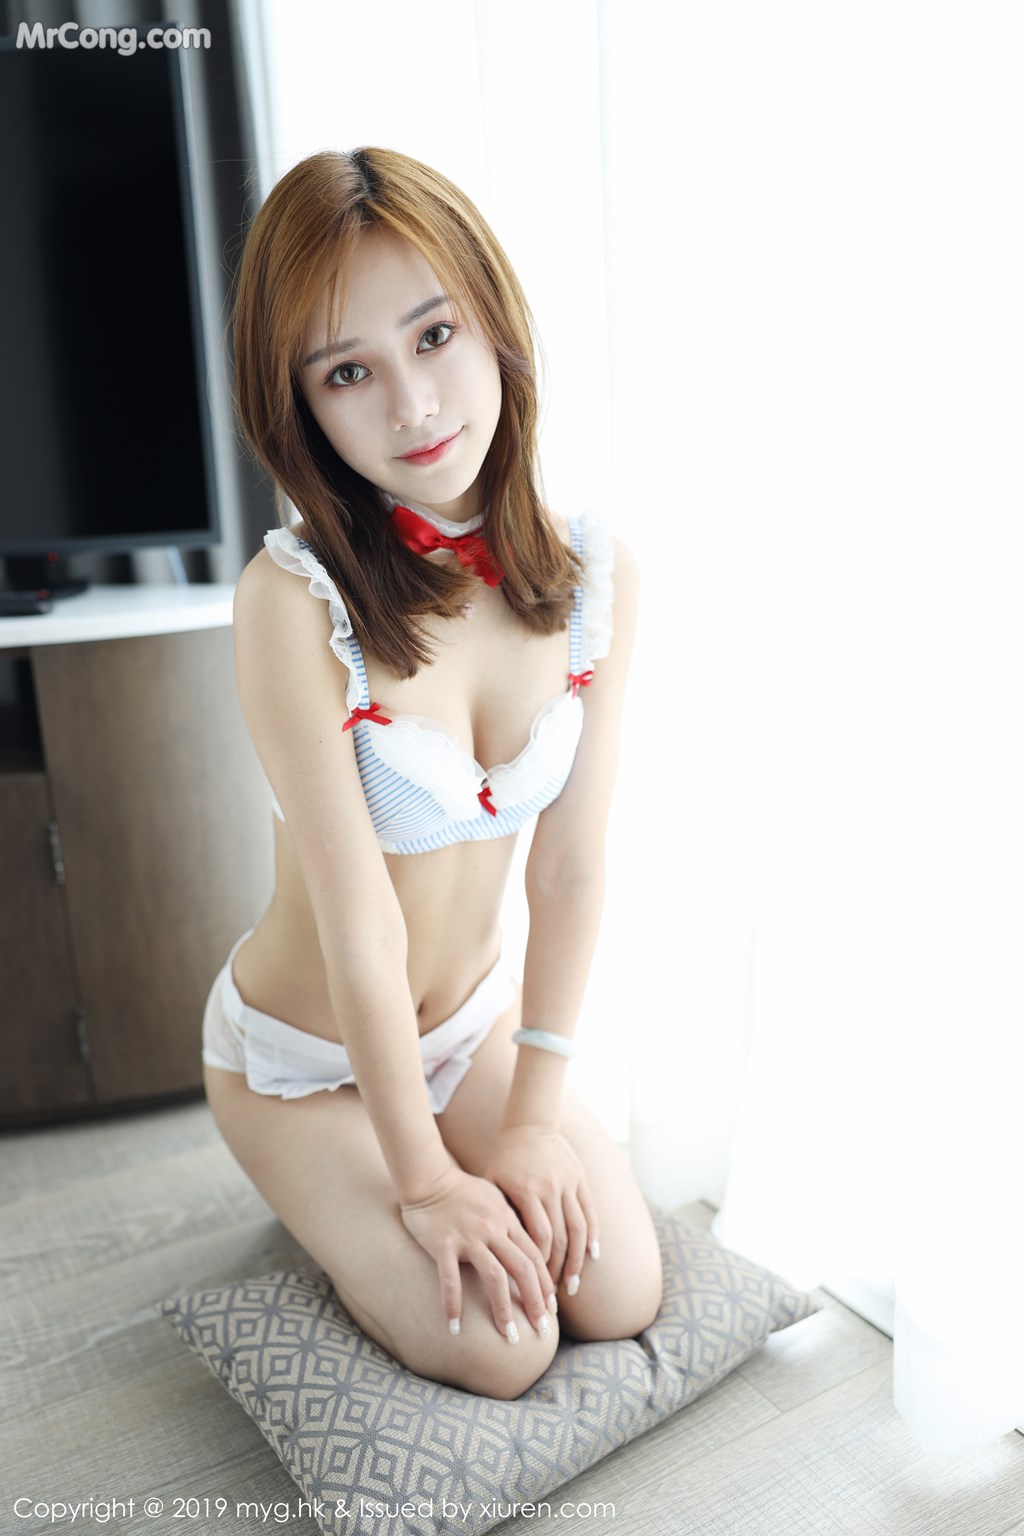 MyGirl Vol.356: 羽 住 real (55 pictures) photo 1-16